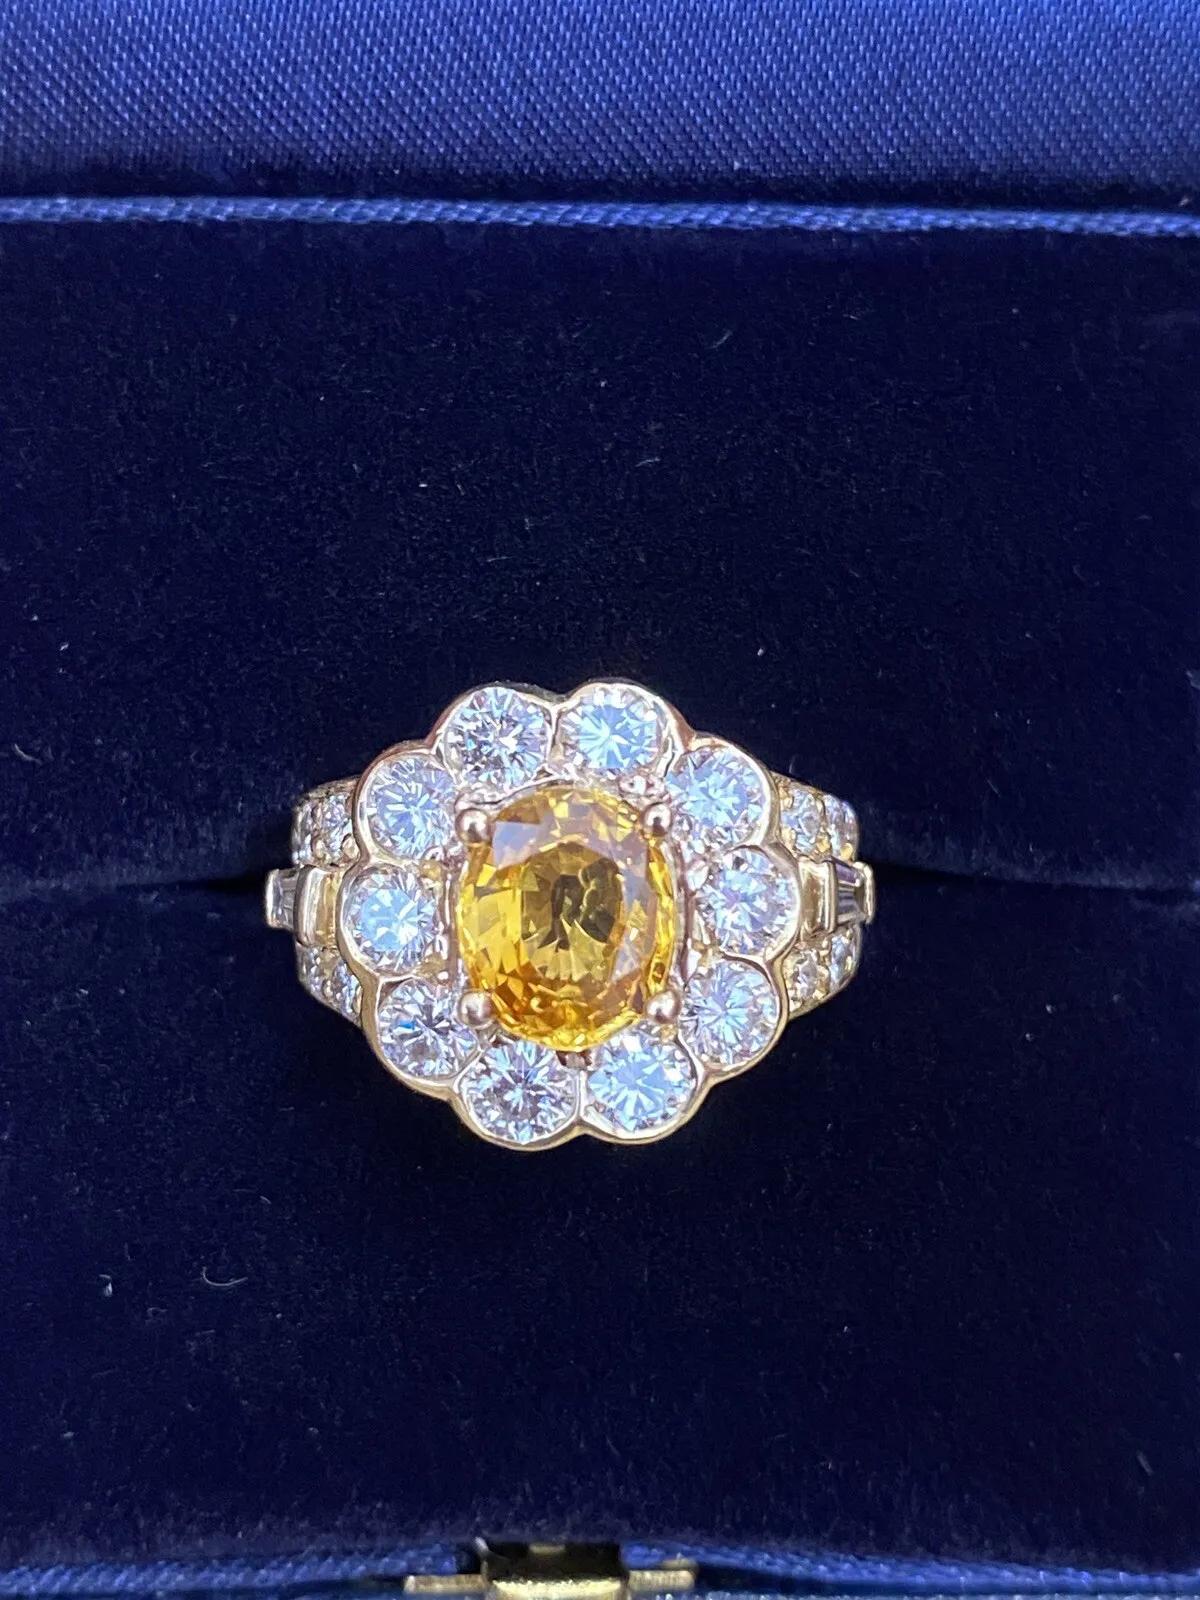 JB STAR Yellow Sapphire & Diamond Ring in 18k Yellow Gold

Yellow Sapphire and Diamond Ring features an Oval Lively Vibrant Yellow Sapphire in the center surrounded by Round Brilliants and Baguette Diamonds bezel, prong & pavè set in 18k Yellow